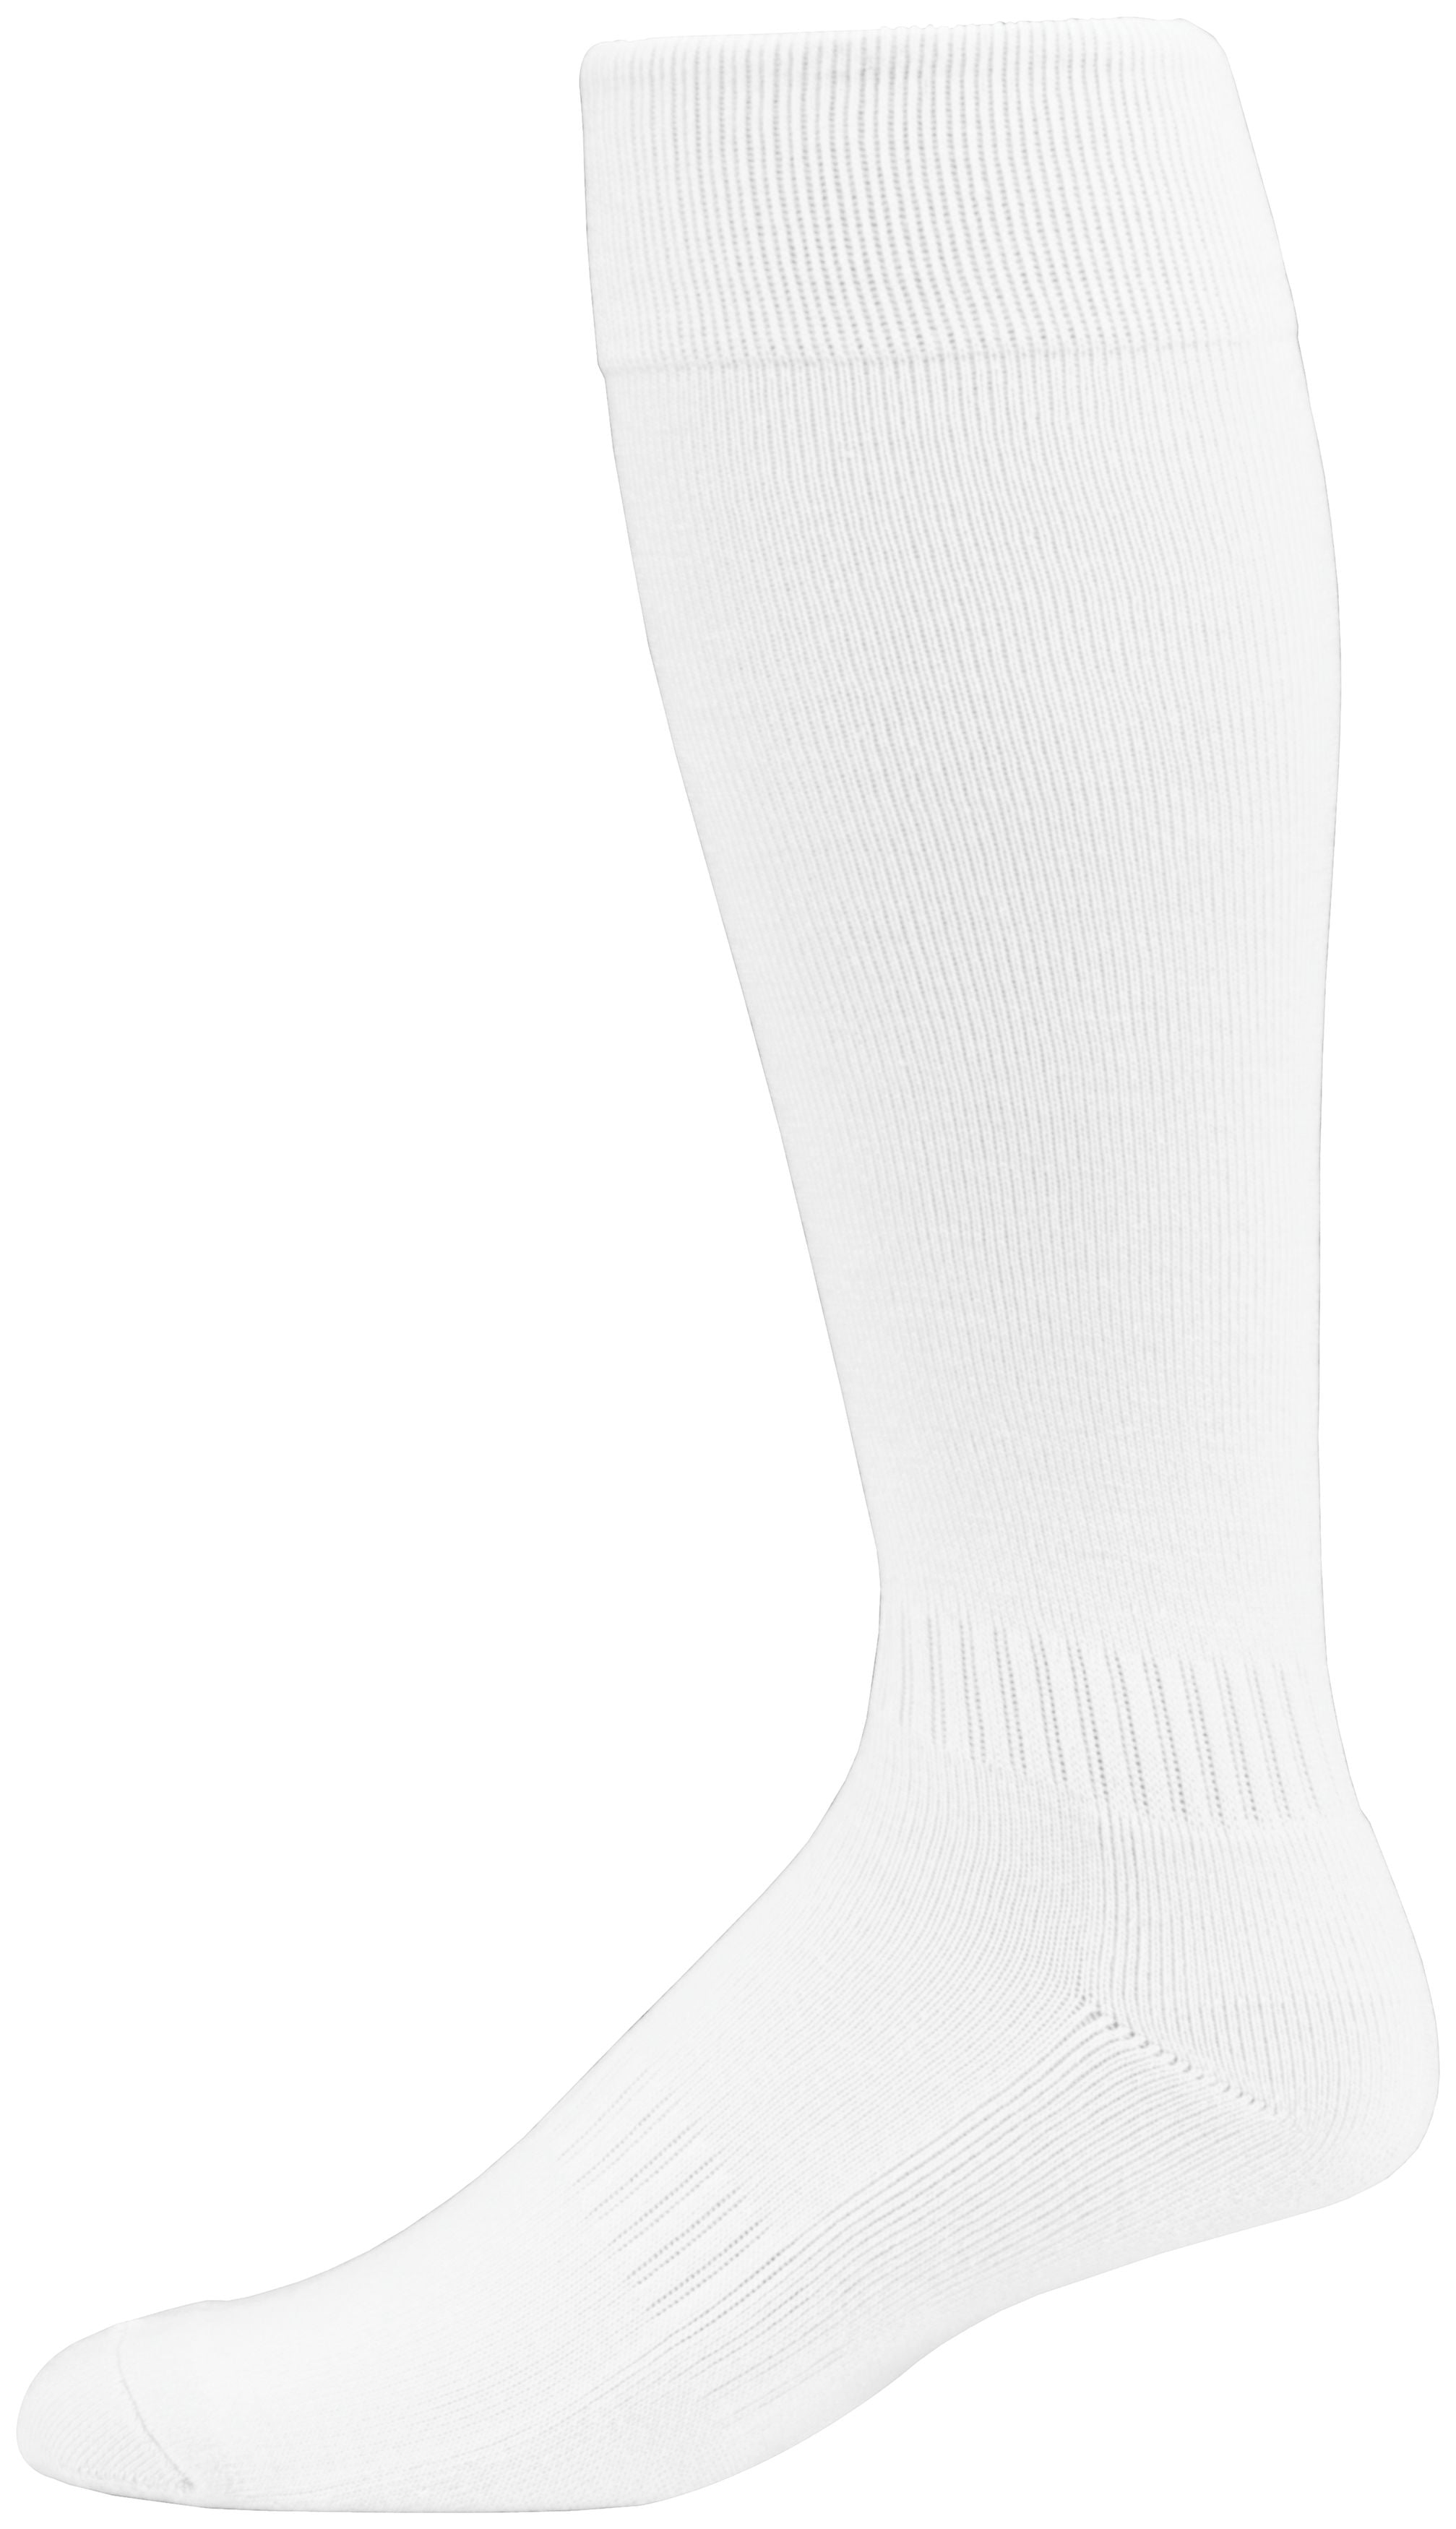 Augusta Sportswear Elite Multi-Sport Sock in White  -Part of the Accessories, Augusta-Products, Accessories-Socks product lines at KanaleyCreations.com